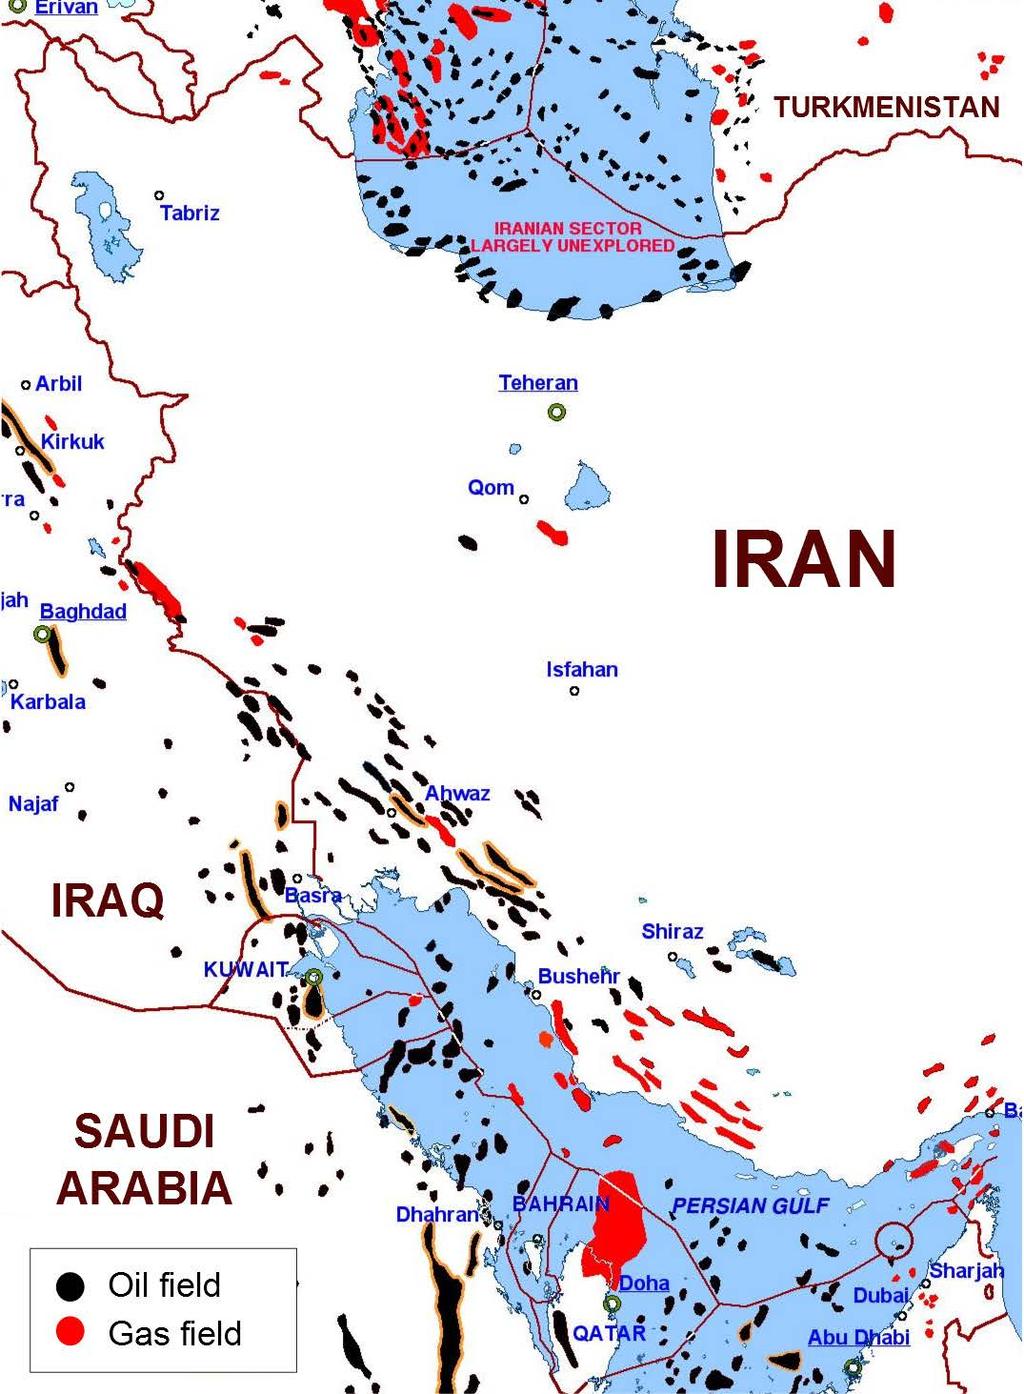 IRANIAN OCTG MARKETS The continued drilling of Iran s offshore gas fields is expected to stimulate